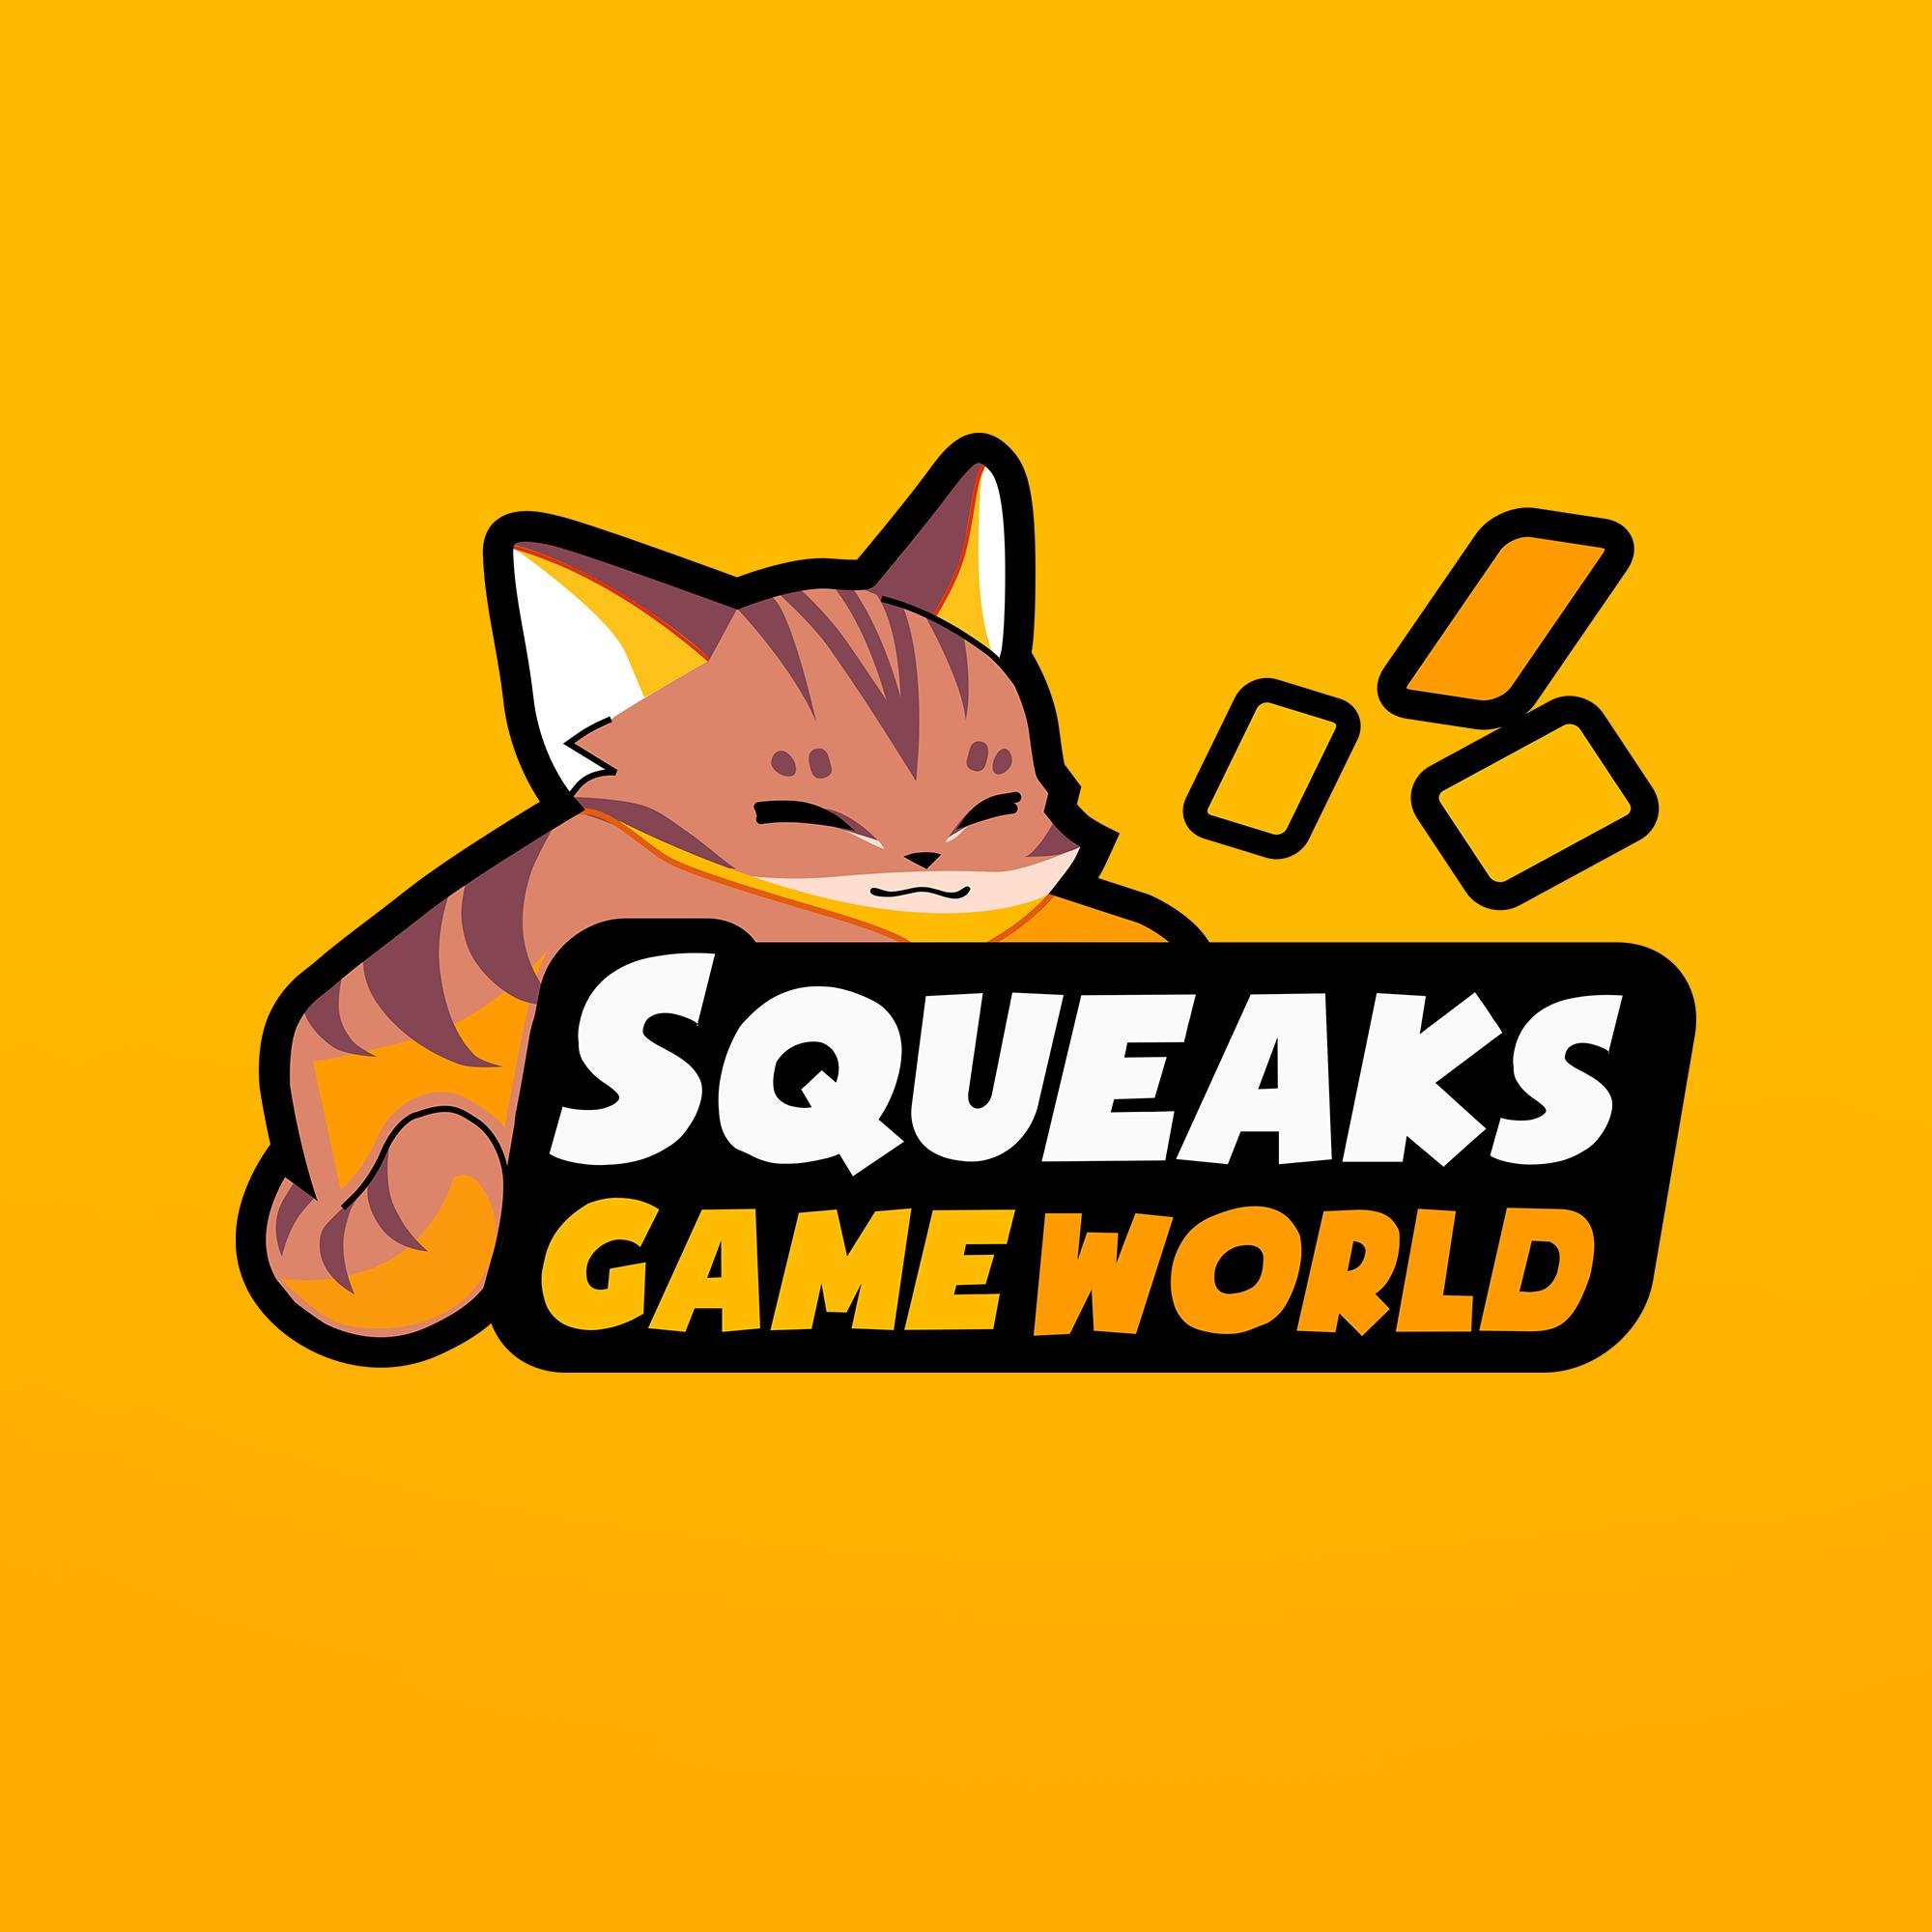 Official Page of SqueaksGameWorld
🥇 Investor in Pokemon & Video Games
👨‍💻 Online Storefront for Hobby & Import Merch
♟  DMs Always Open to Help!